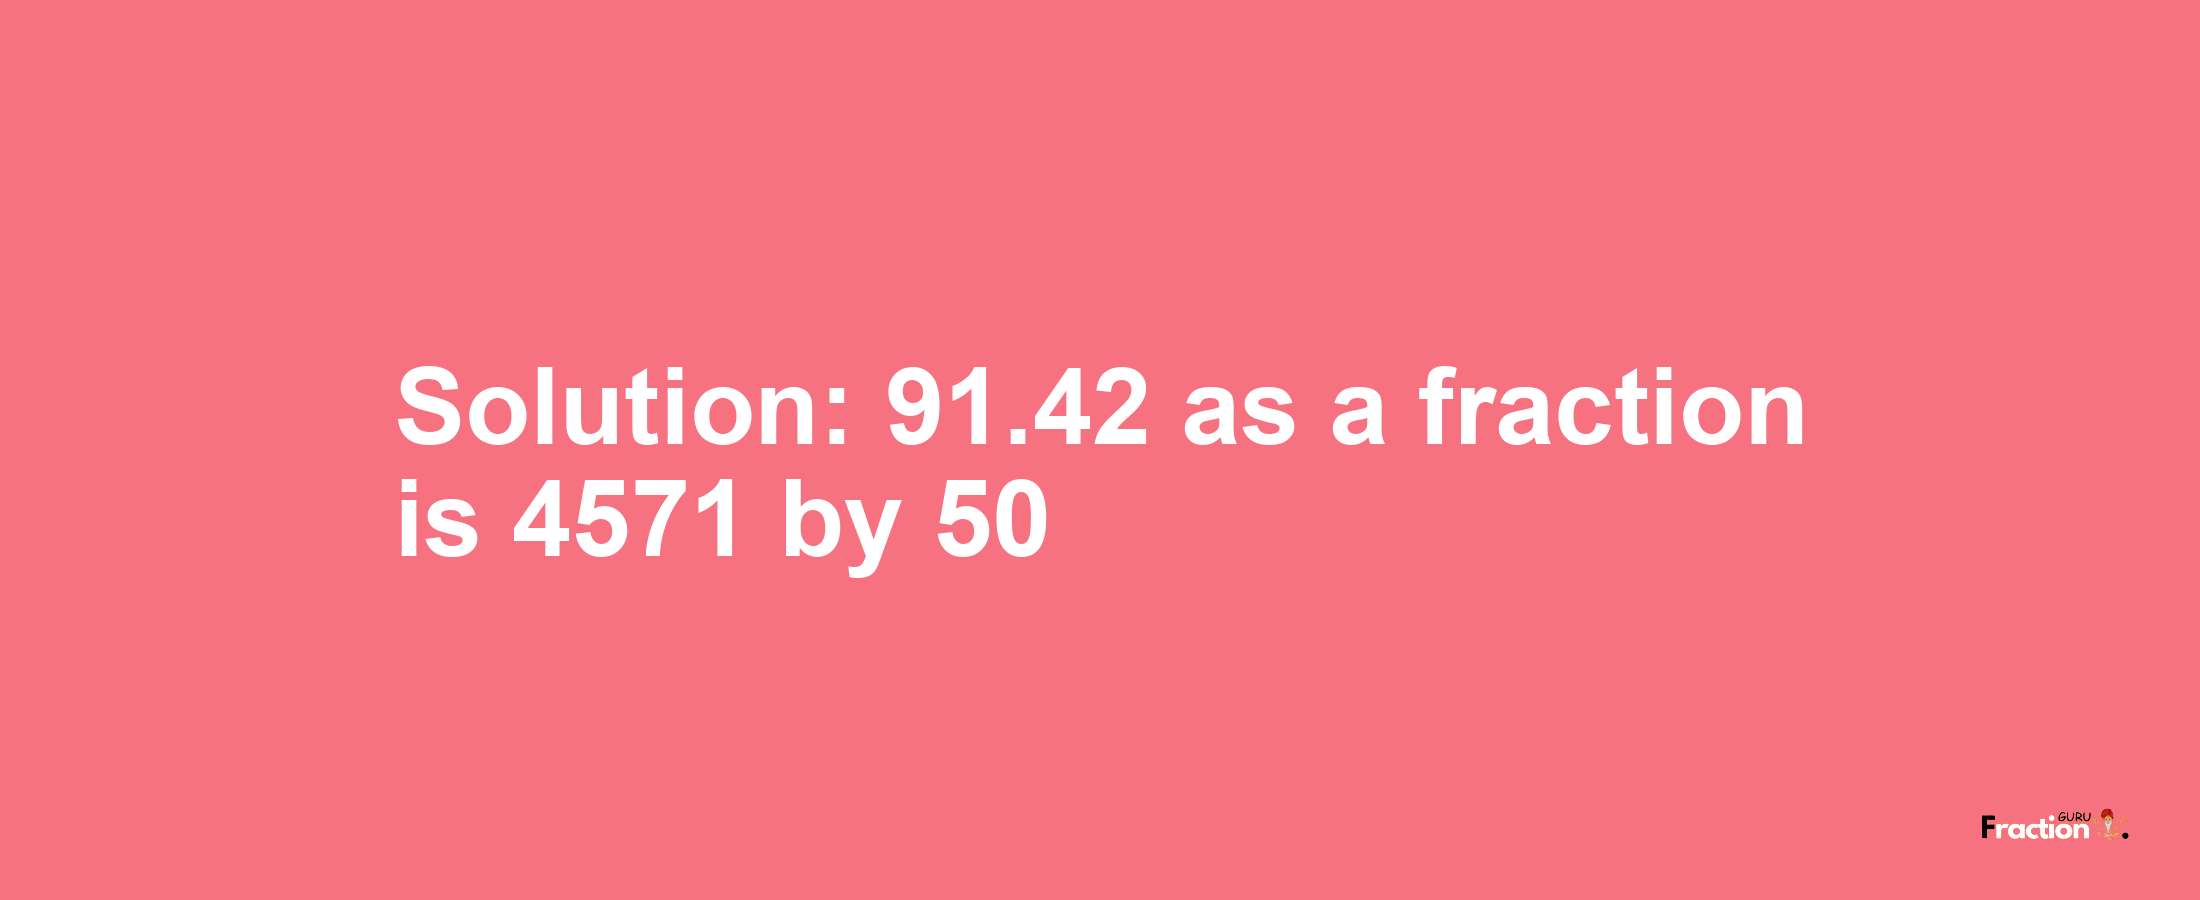 Solution:91.42 as a fraction is 4571/50